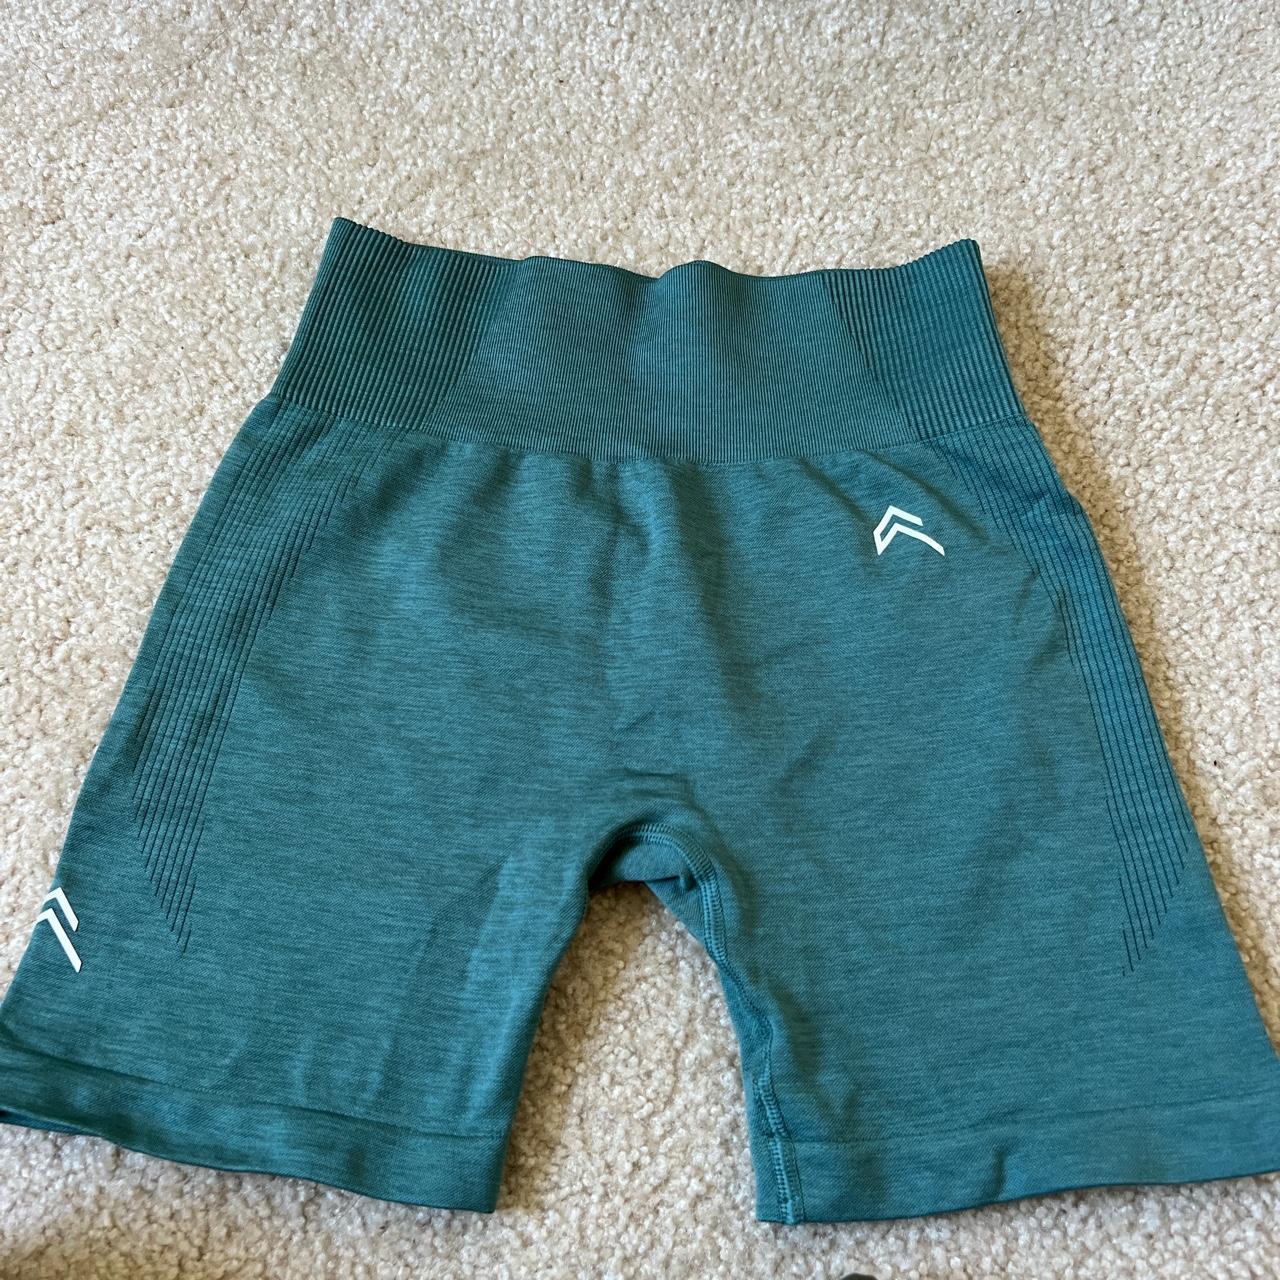 Product Image 1 - Mineral green oner active shorts!!